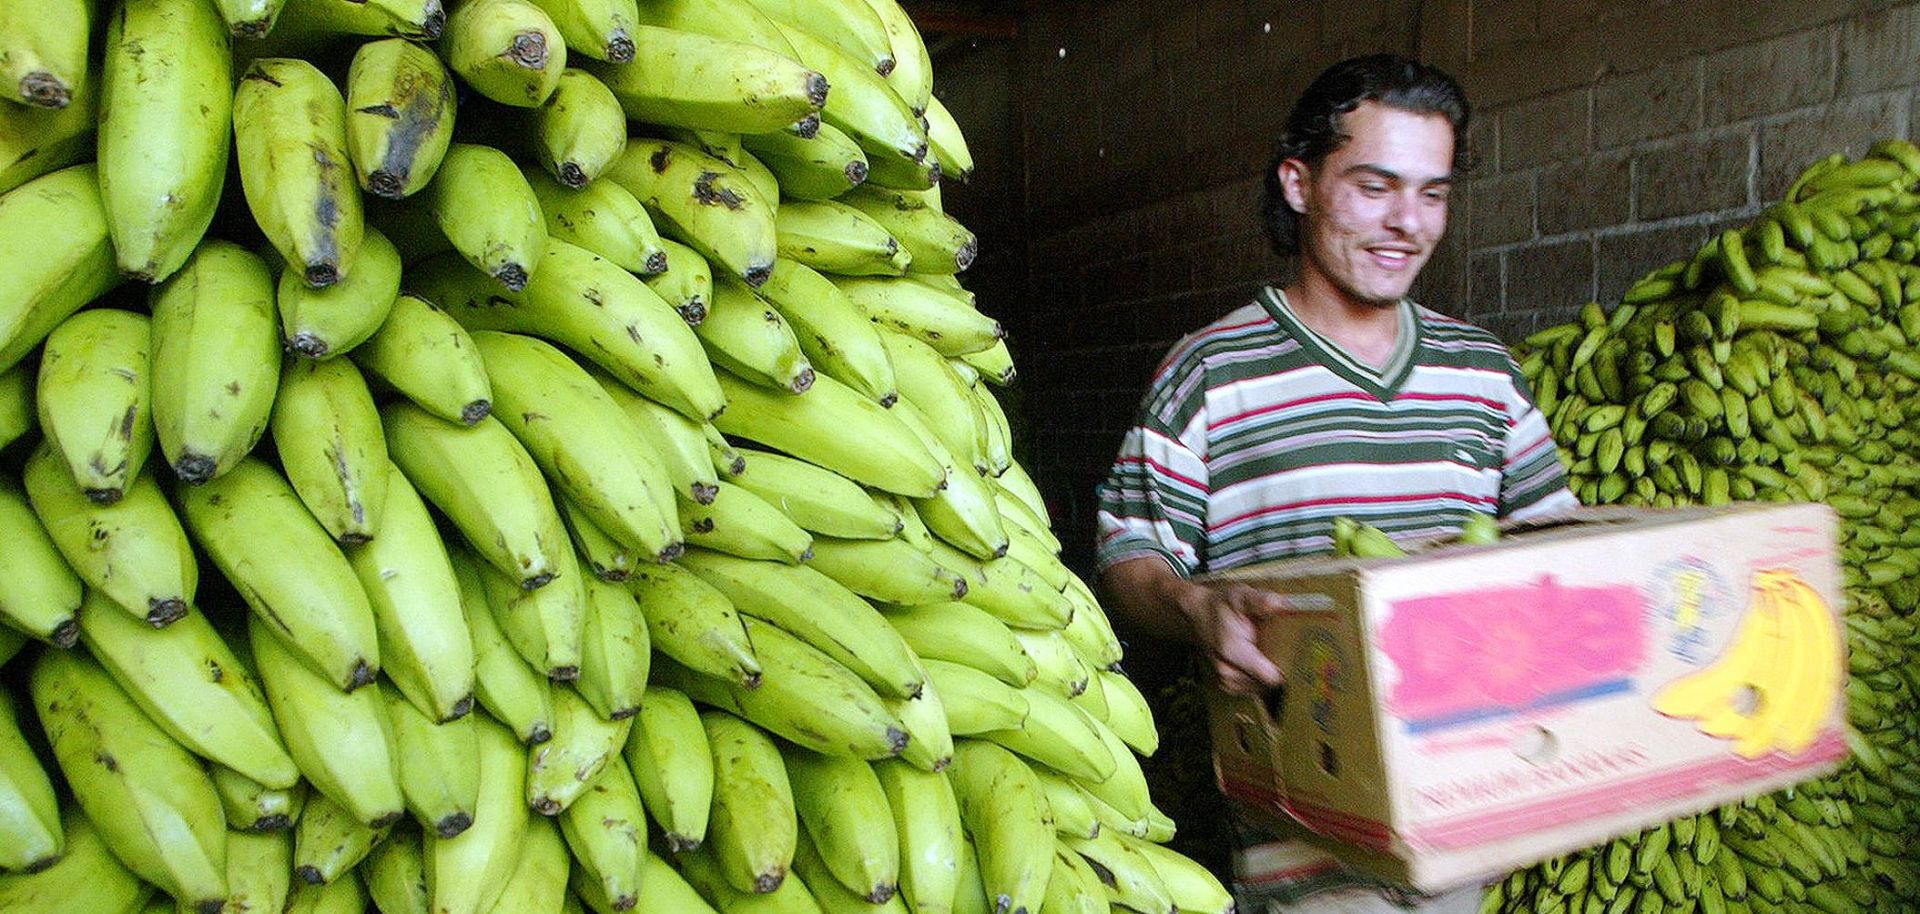 This photo taken in 2006 shows a worker in Honduras carrying a box of bananas in a warehouse.